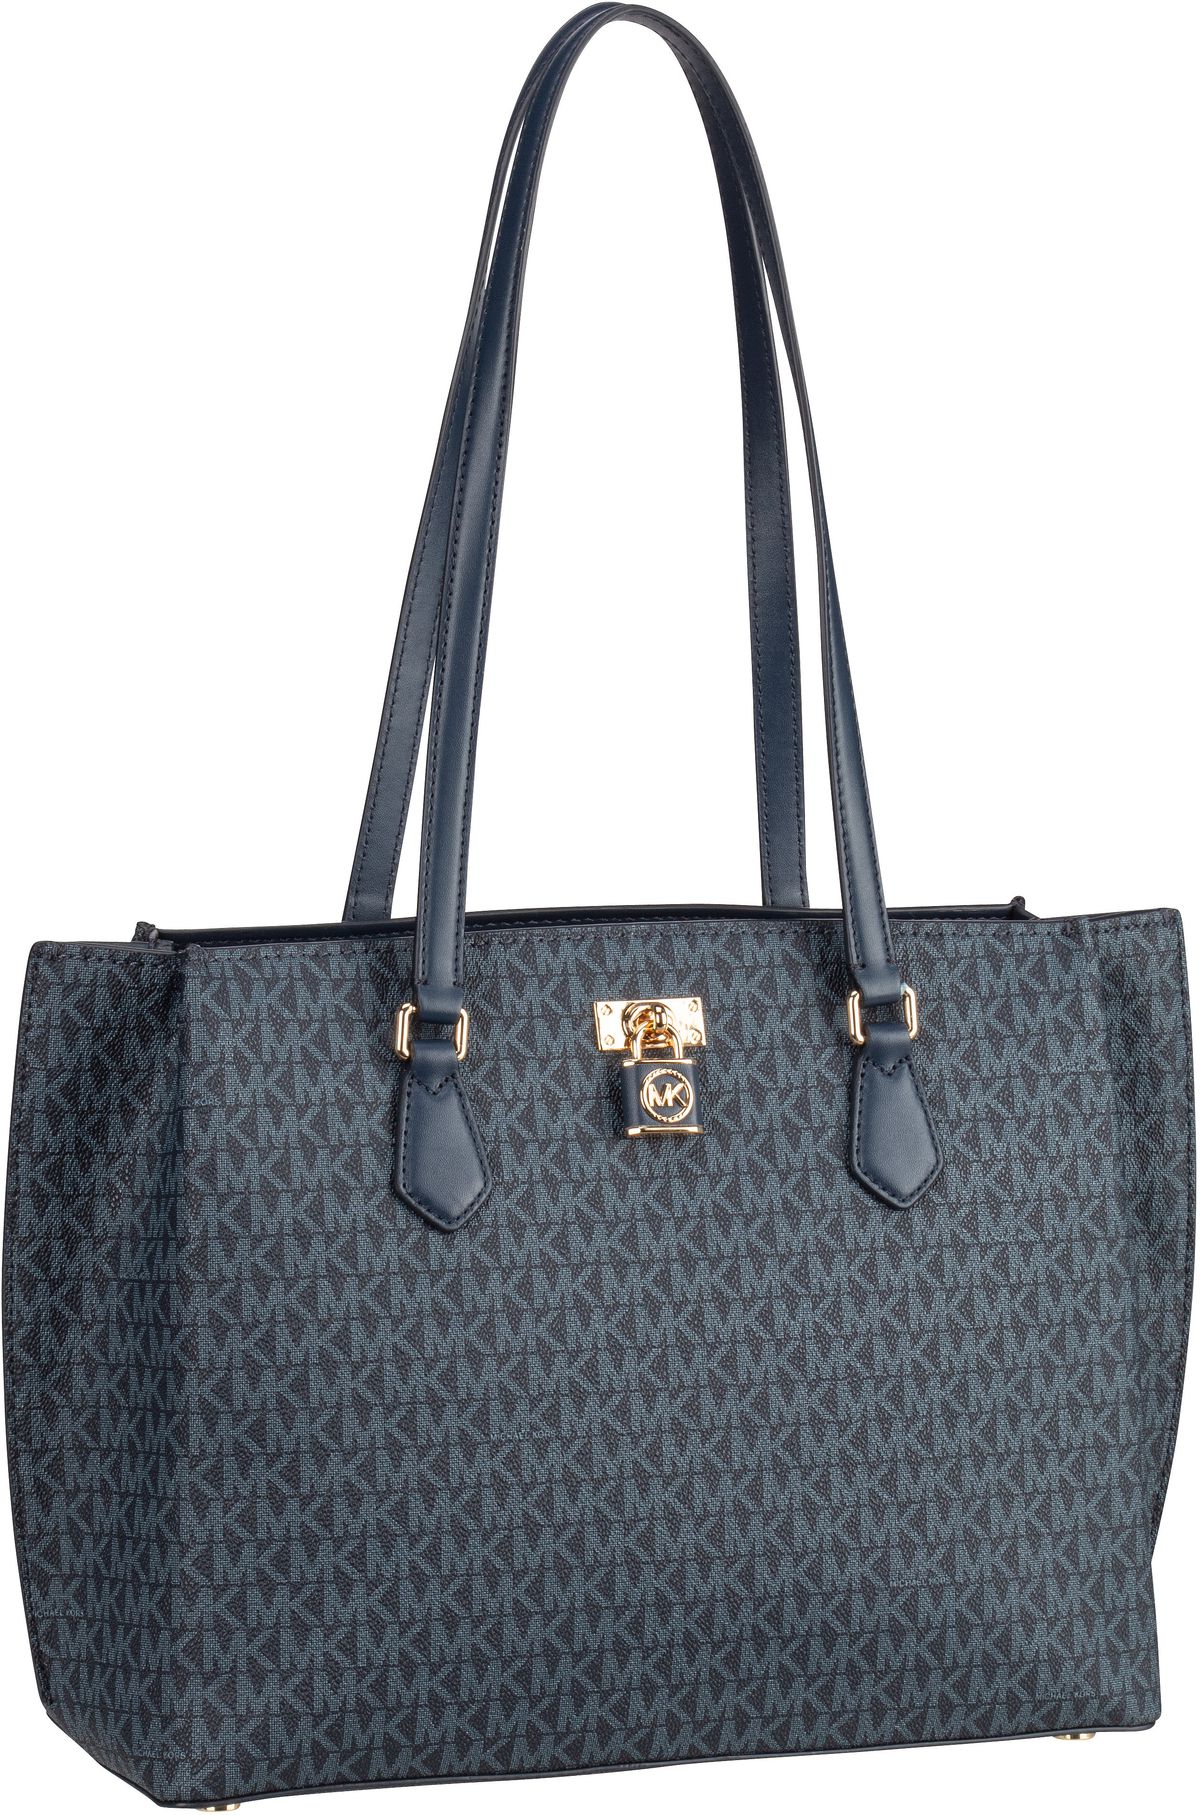 Michael Kors Ruby Large TZ Tote - Admiral/Pale Blue